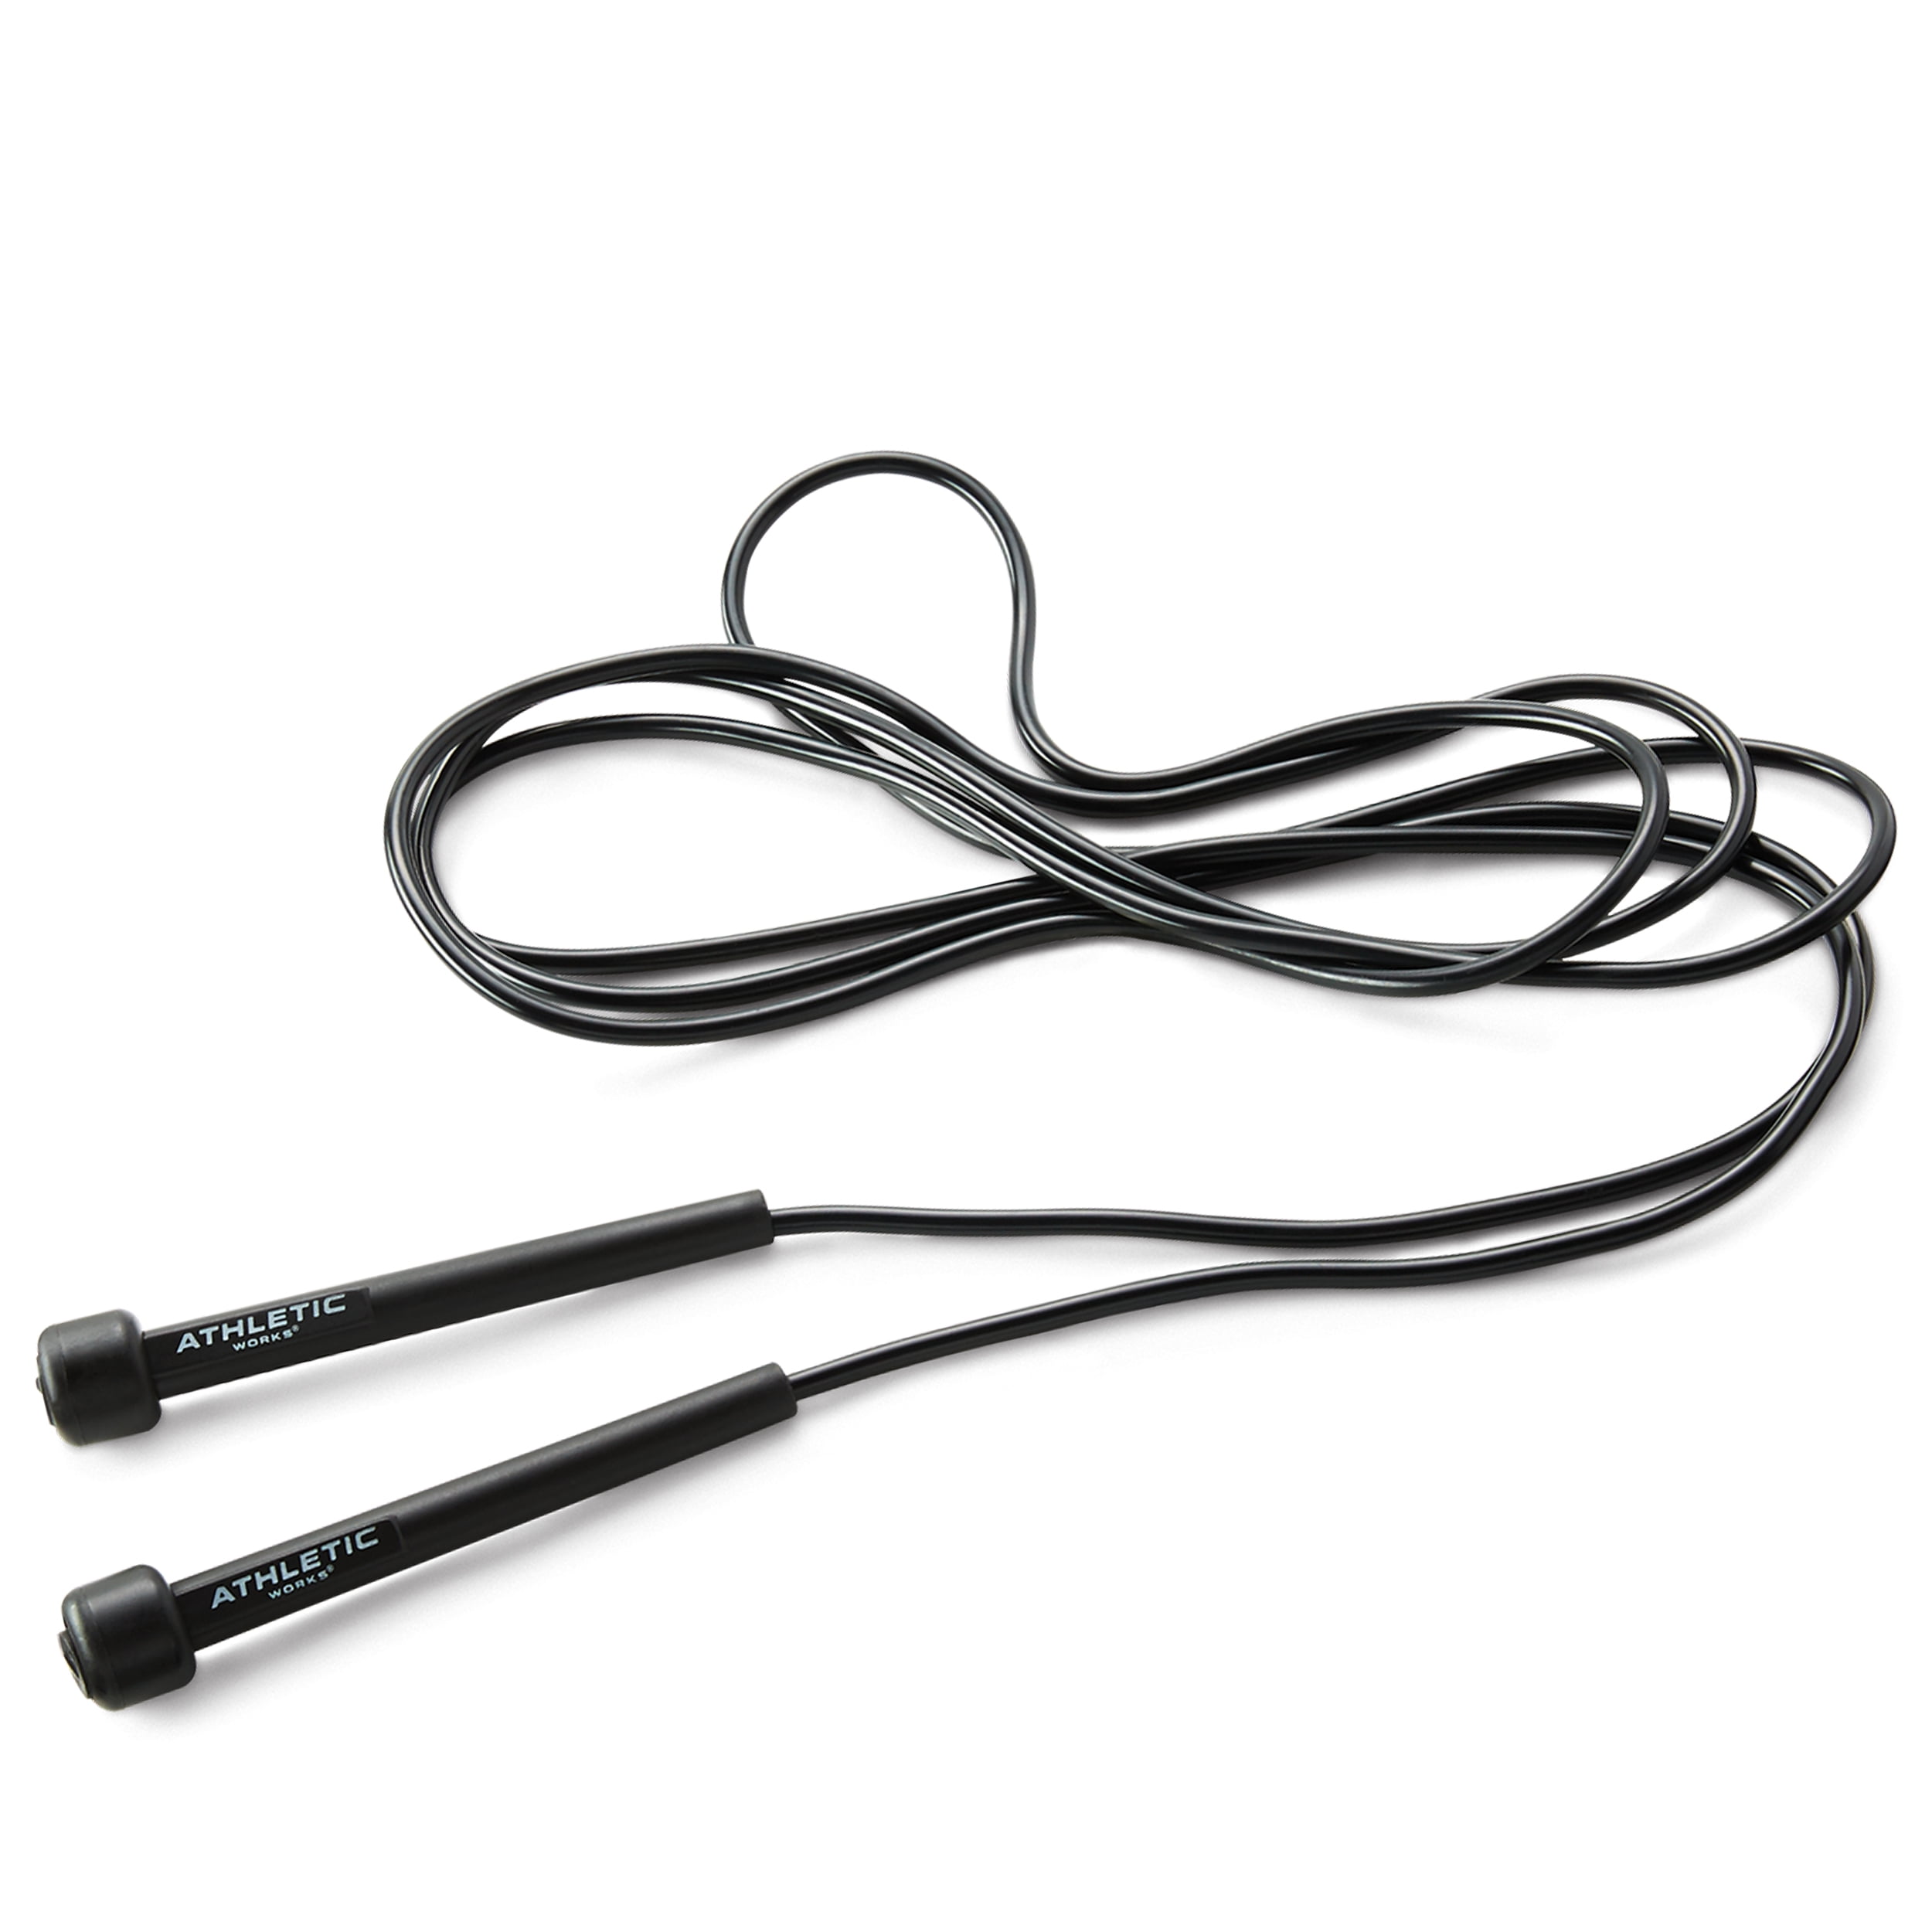 Black Steel Wire Speed Jump Skipping Rope Exercise Gym Training Sports Equipment 